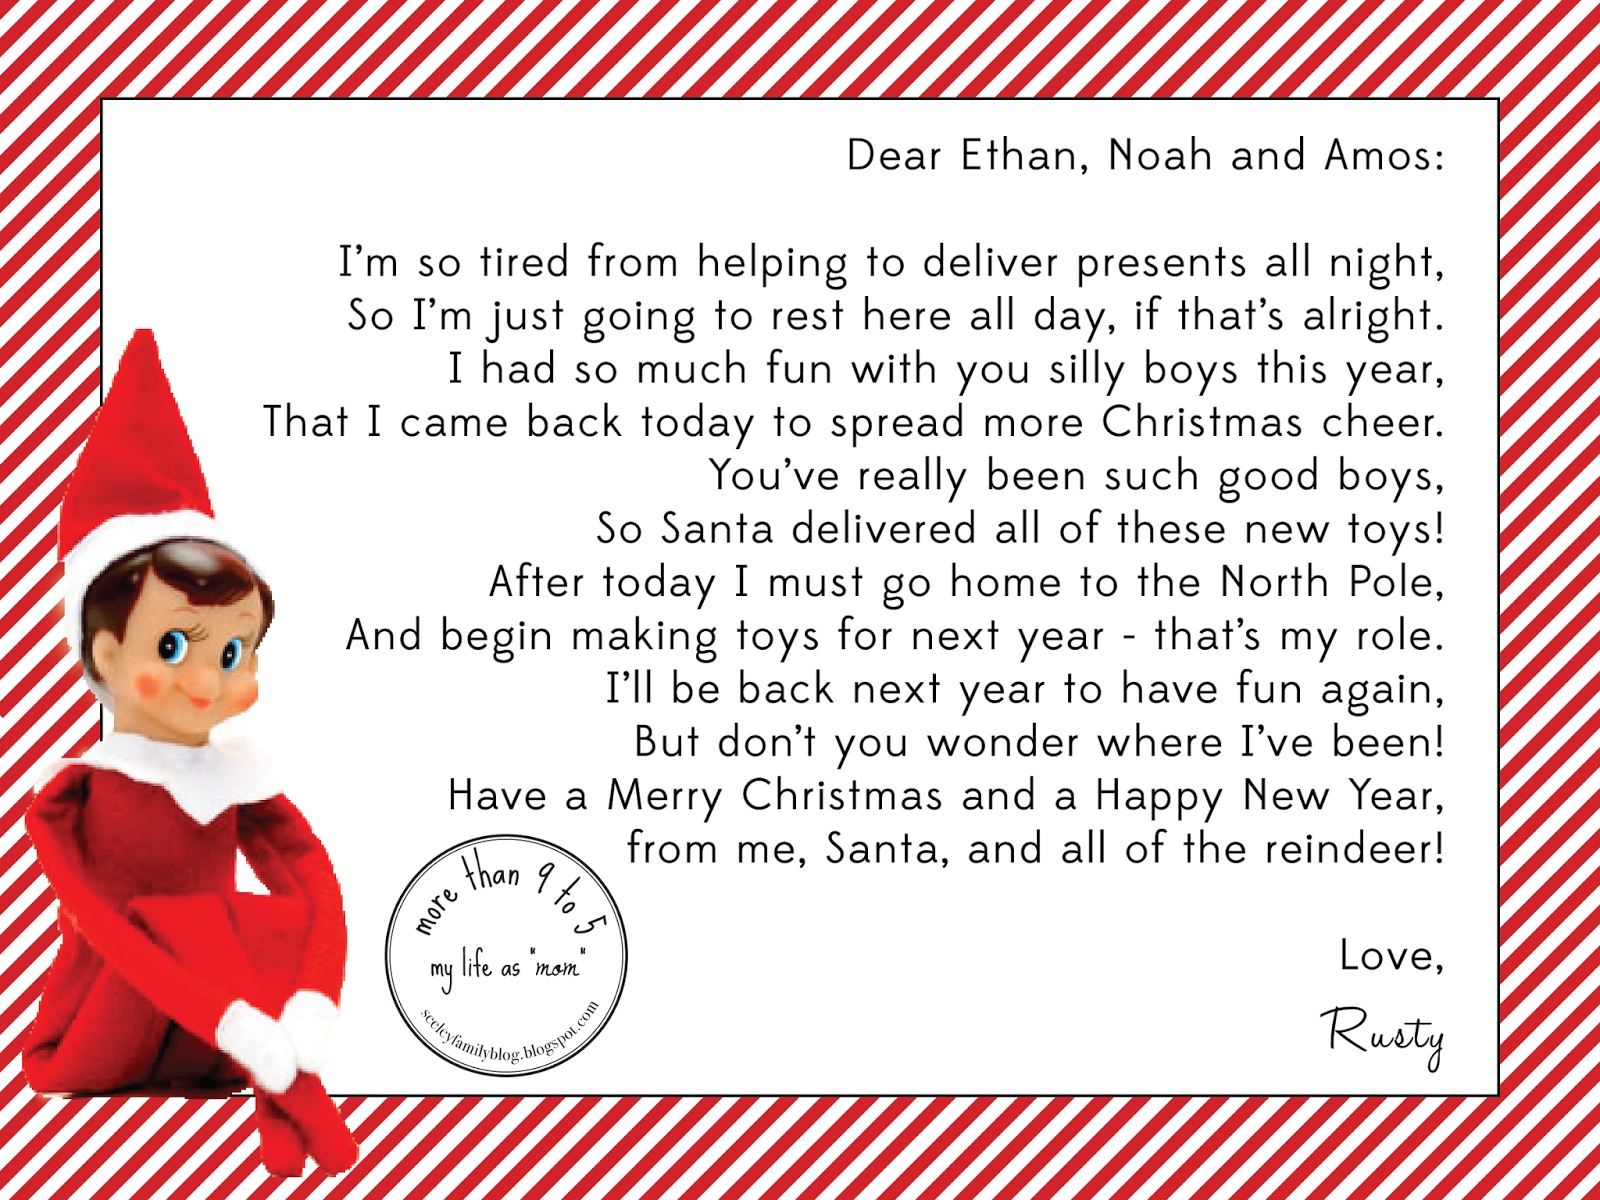 10 Great Elf On The Shelf Letter Ideas more than 9 to 5my life as mom the elf 2022